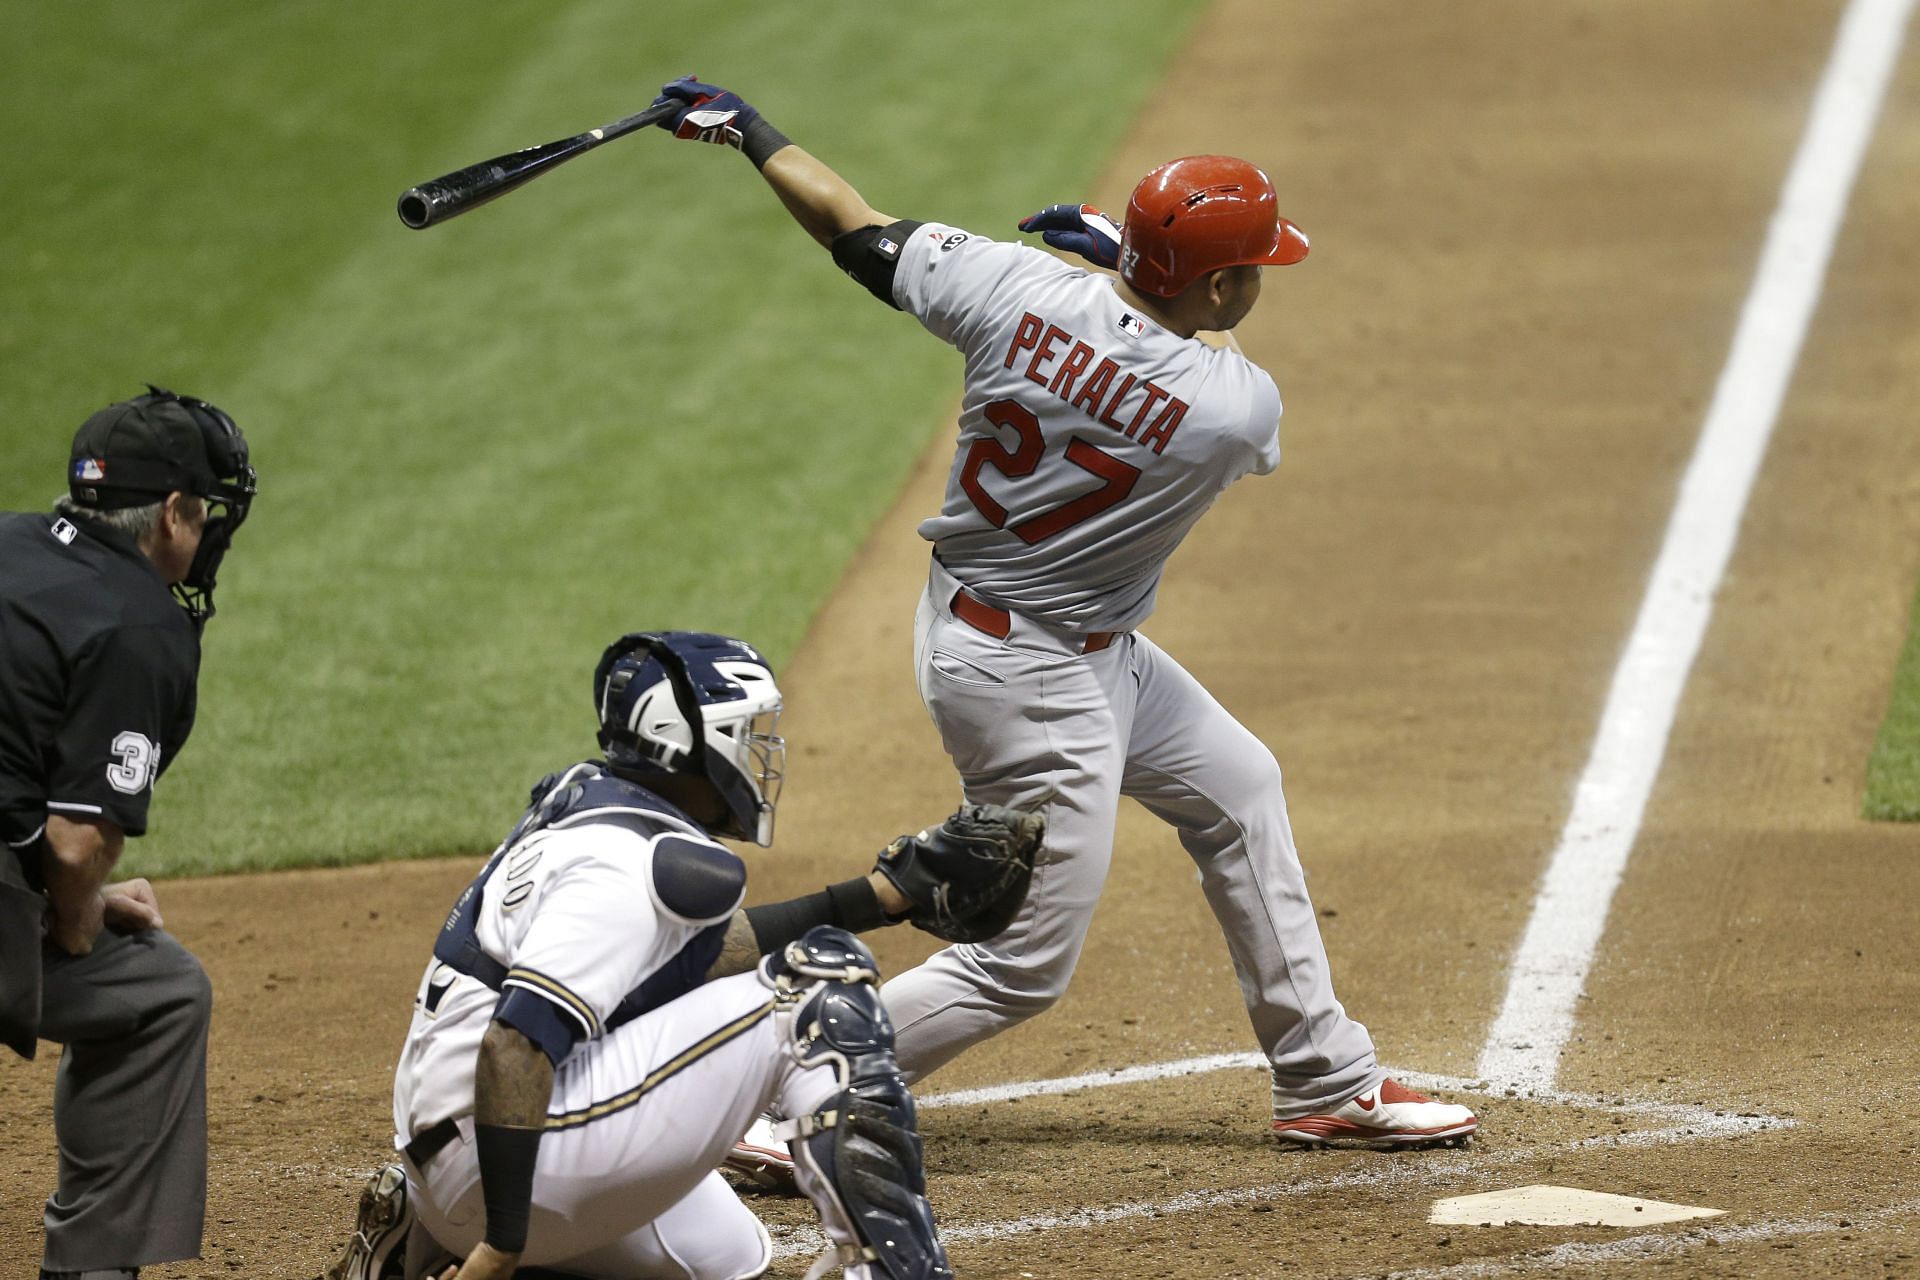 Jhonny Peralta #27 of the St. Louis Cardinals hits an RBI single in the sixth inning against the Milwaukee Brewers at Miller Park on September 15, 2015 in Milwaukee, Wisconsin.